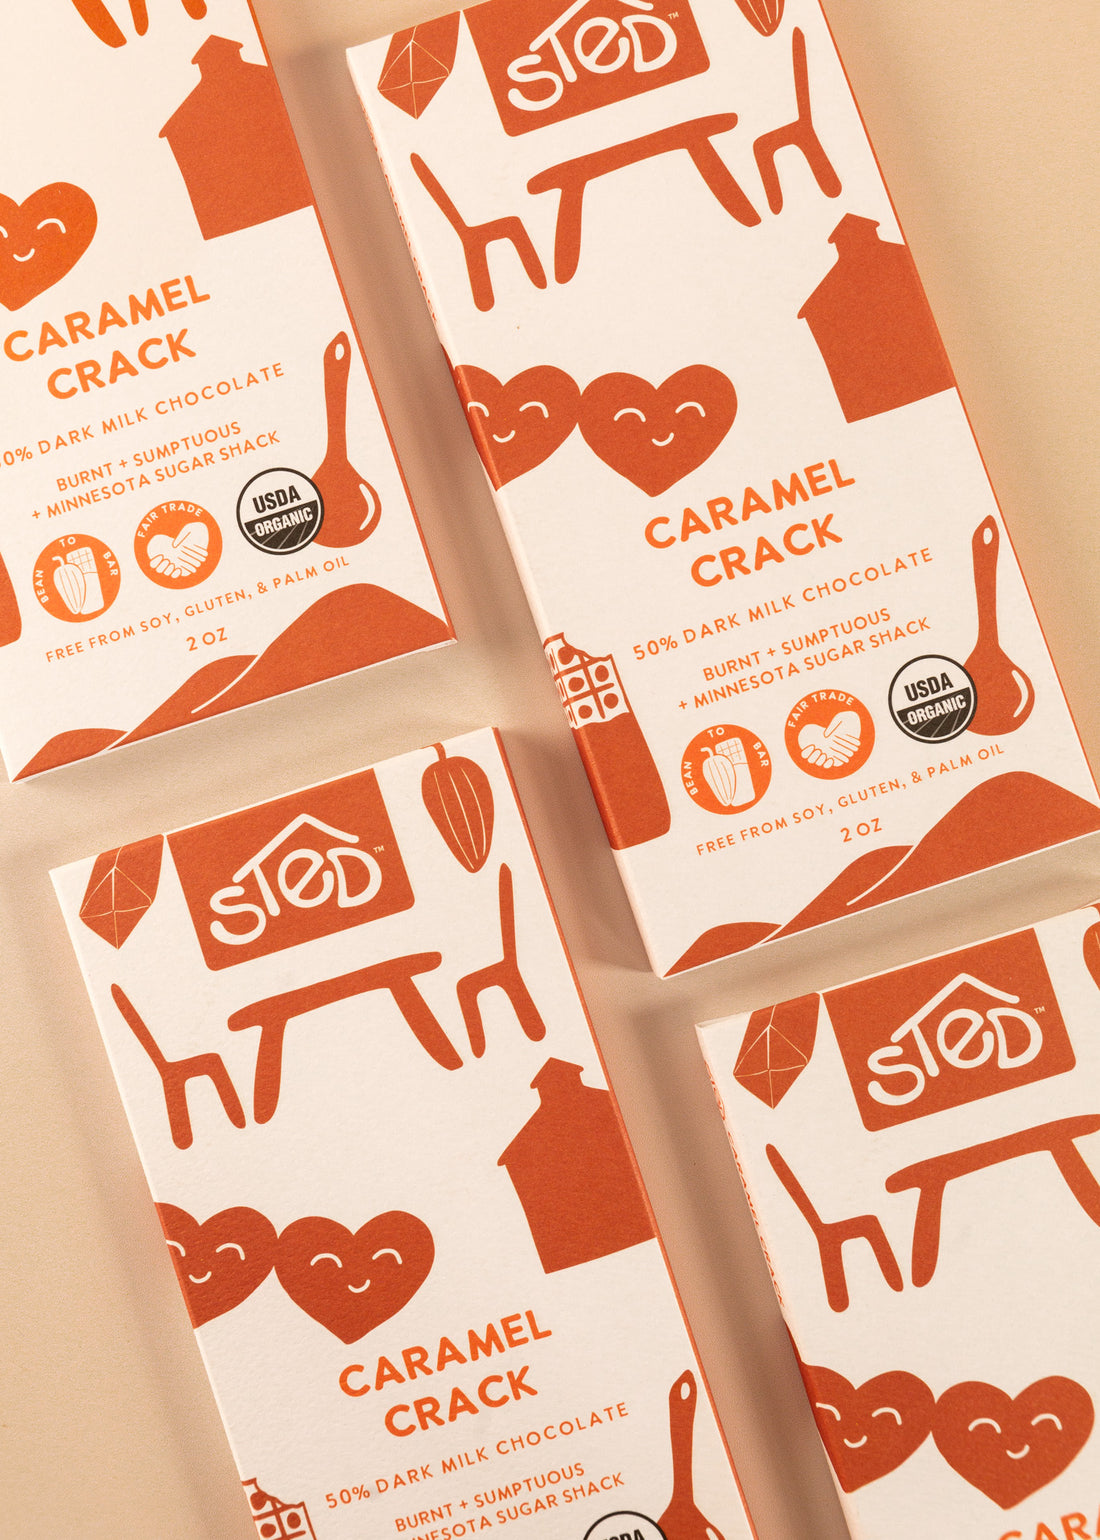 flatlay of four covers of a 50% dark milk chocolate bar by Sted. A white cover with deep orange artwork throughout, named ‘caramel crack’